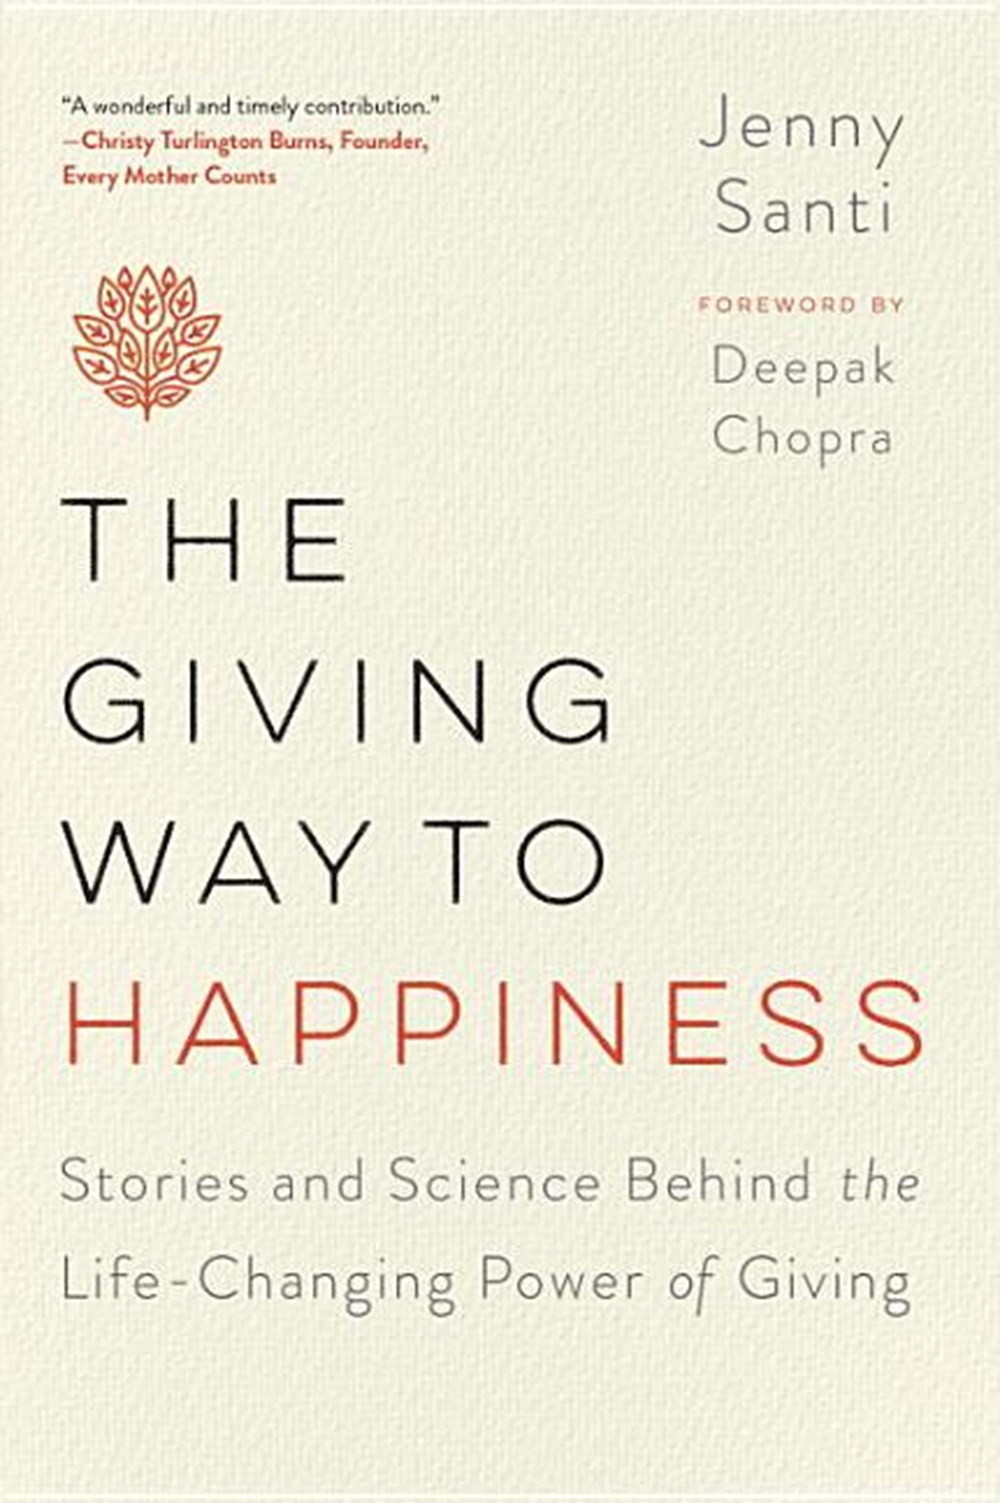 Giving Way to Happiness: Stories and Science Behind the Life-Changing Power of Giving